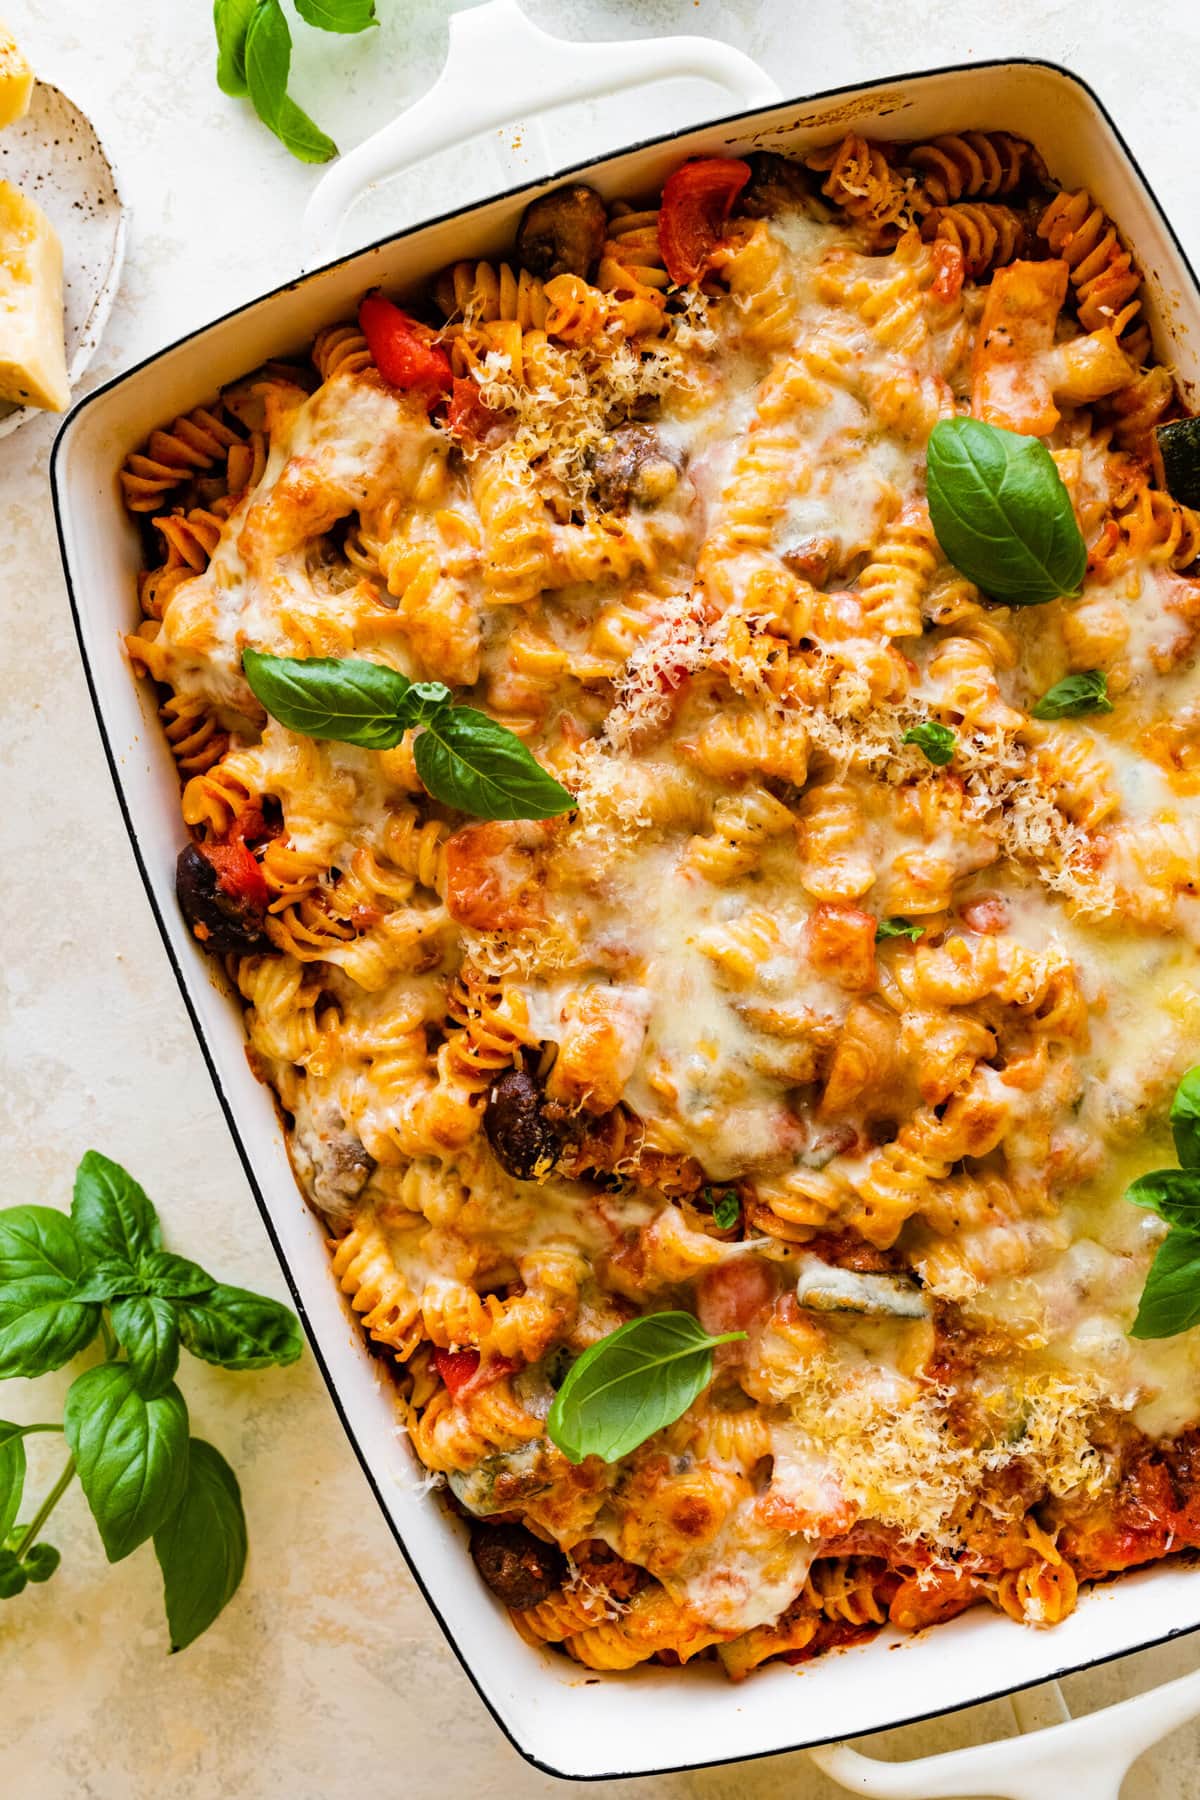 Cheesy Baked Rotini pasta after it is baked melty cheese on top with a few basil leaves.